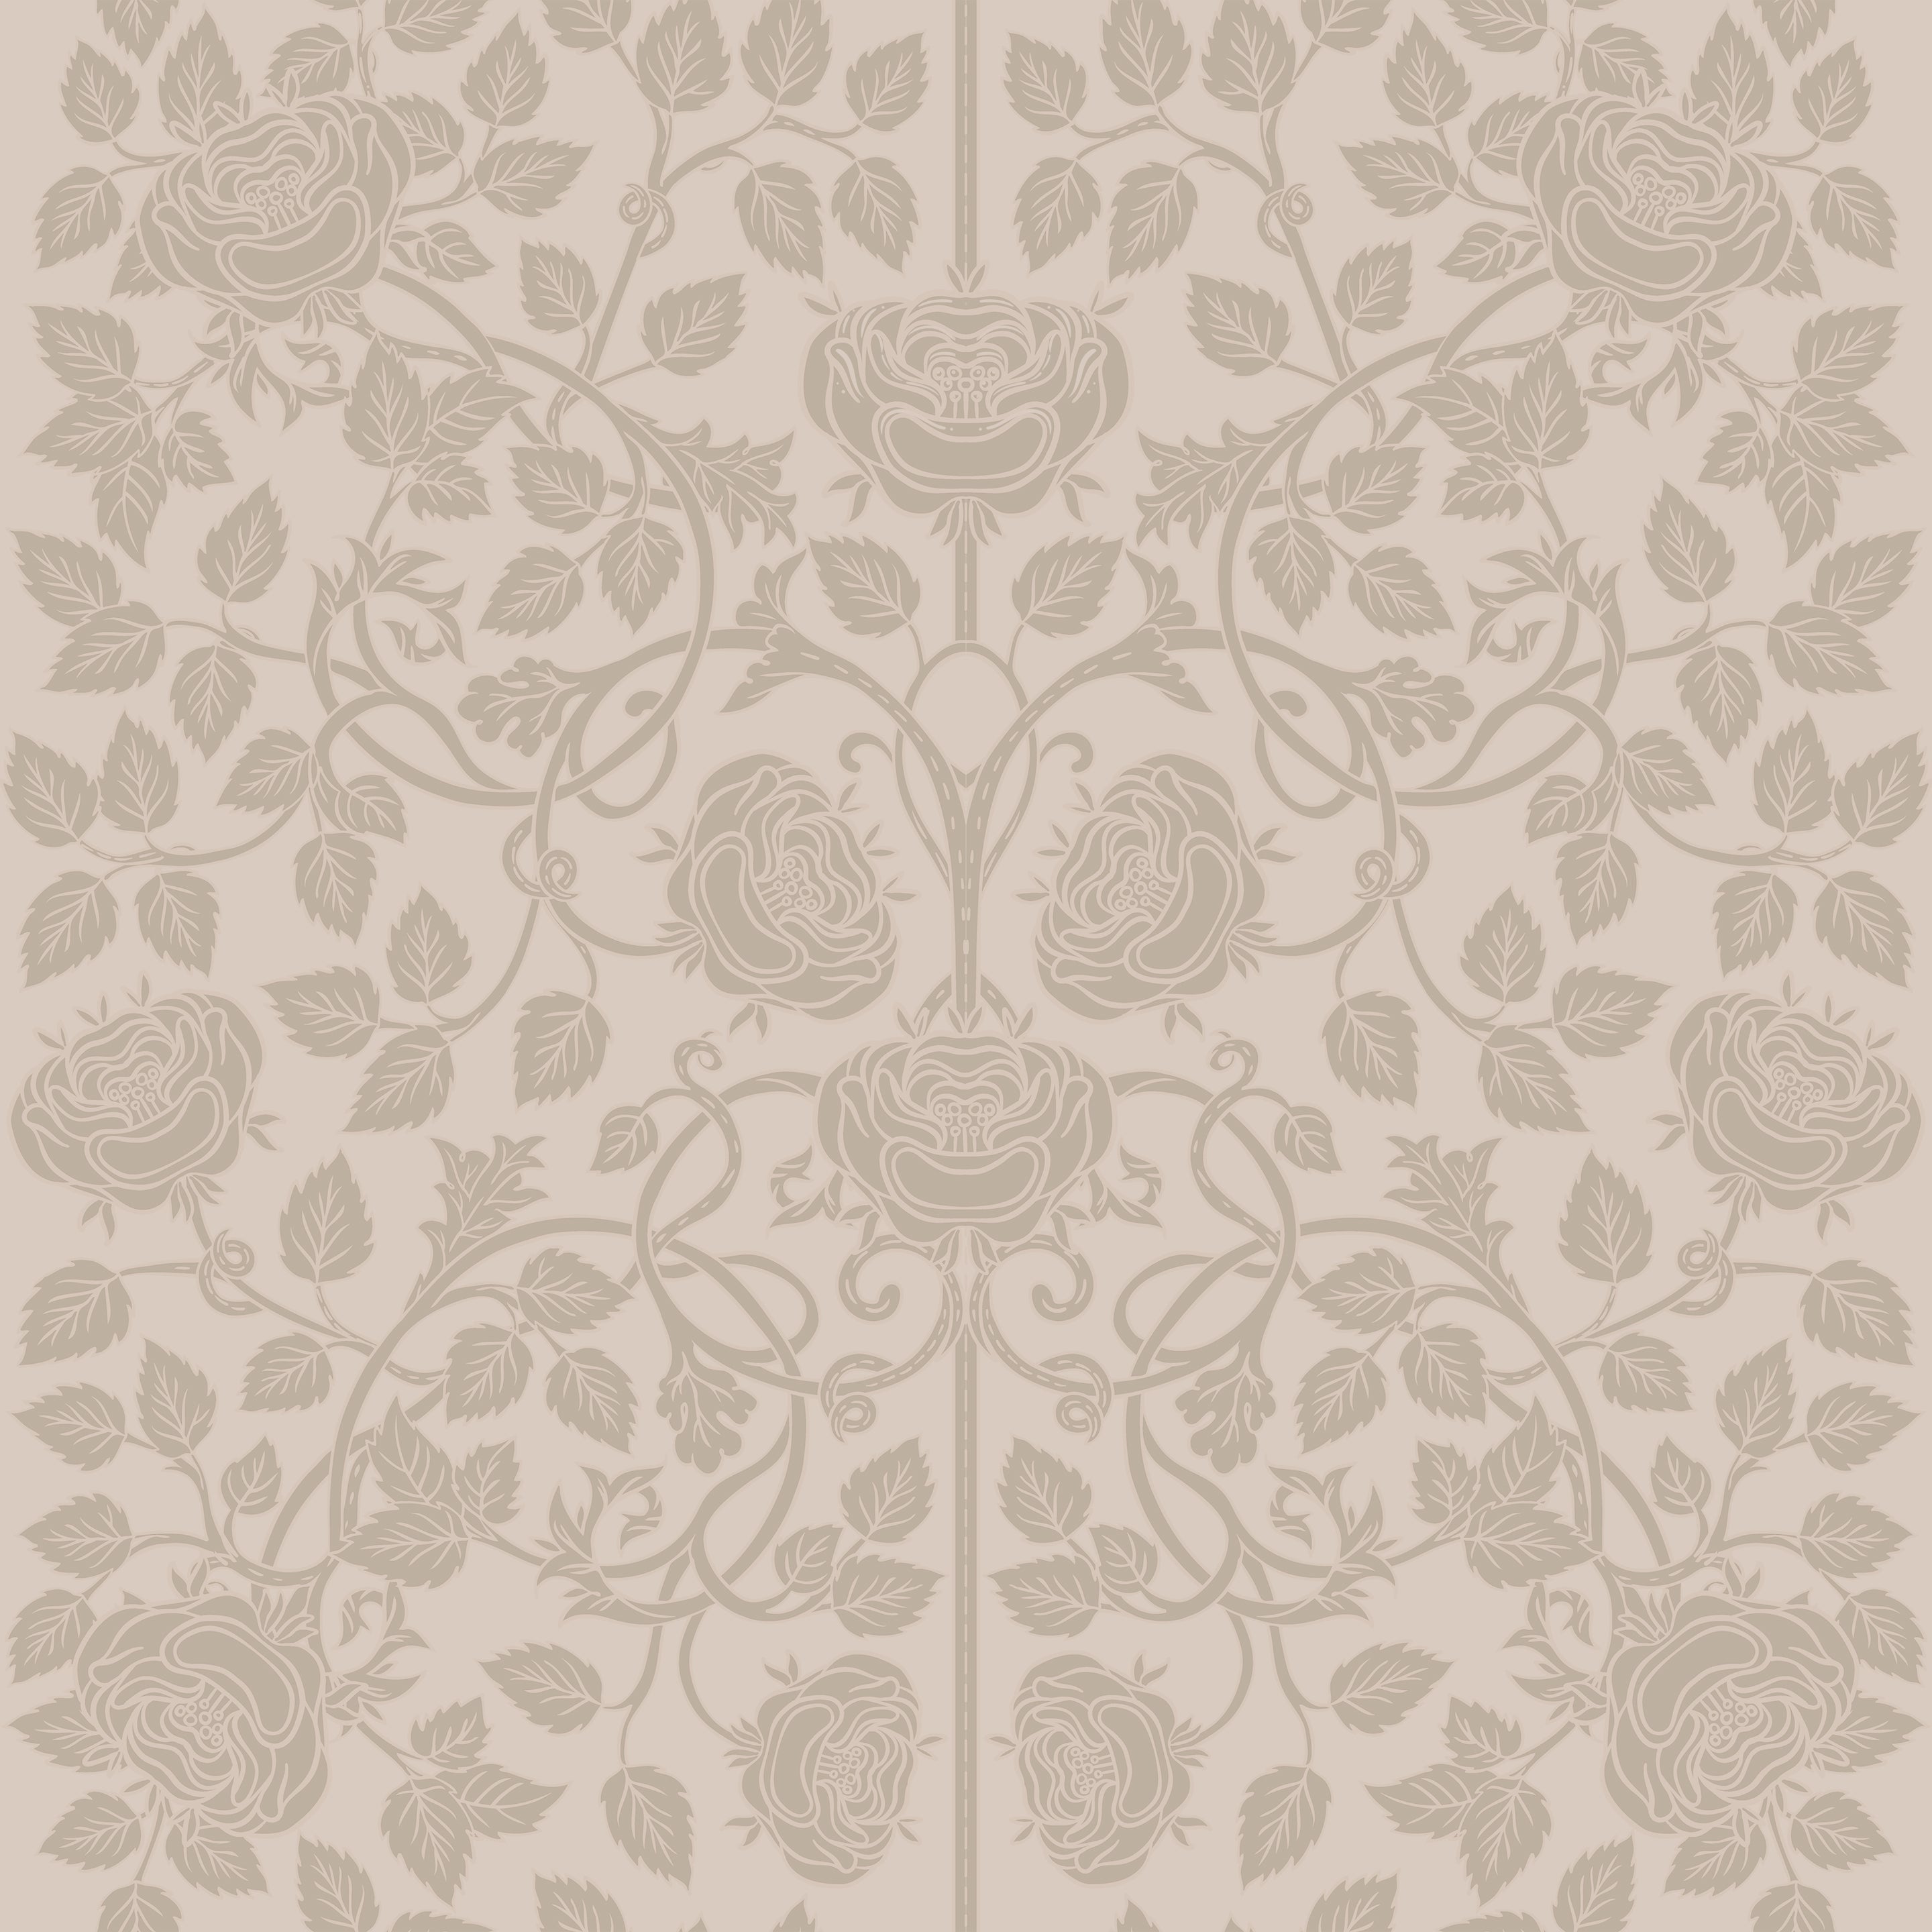 A detailed view of the Linen Color Burn Wallpaper featuring an elegant floral pattern with intertwining roses and leaves in subtle shades of beige, offering a serene and sophisticated aesthetic.